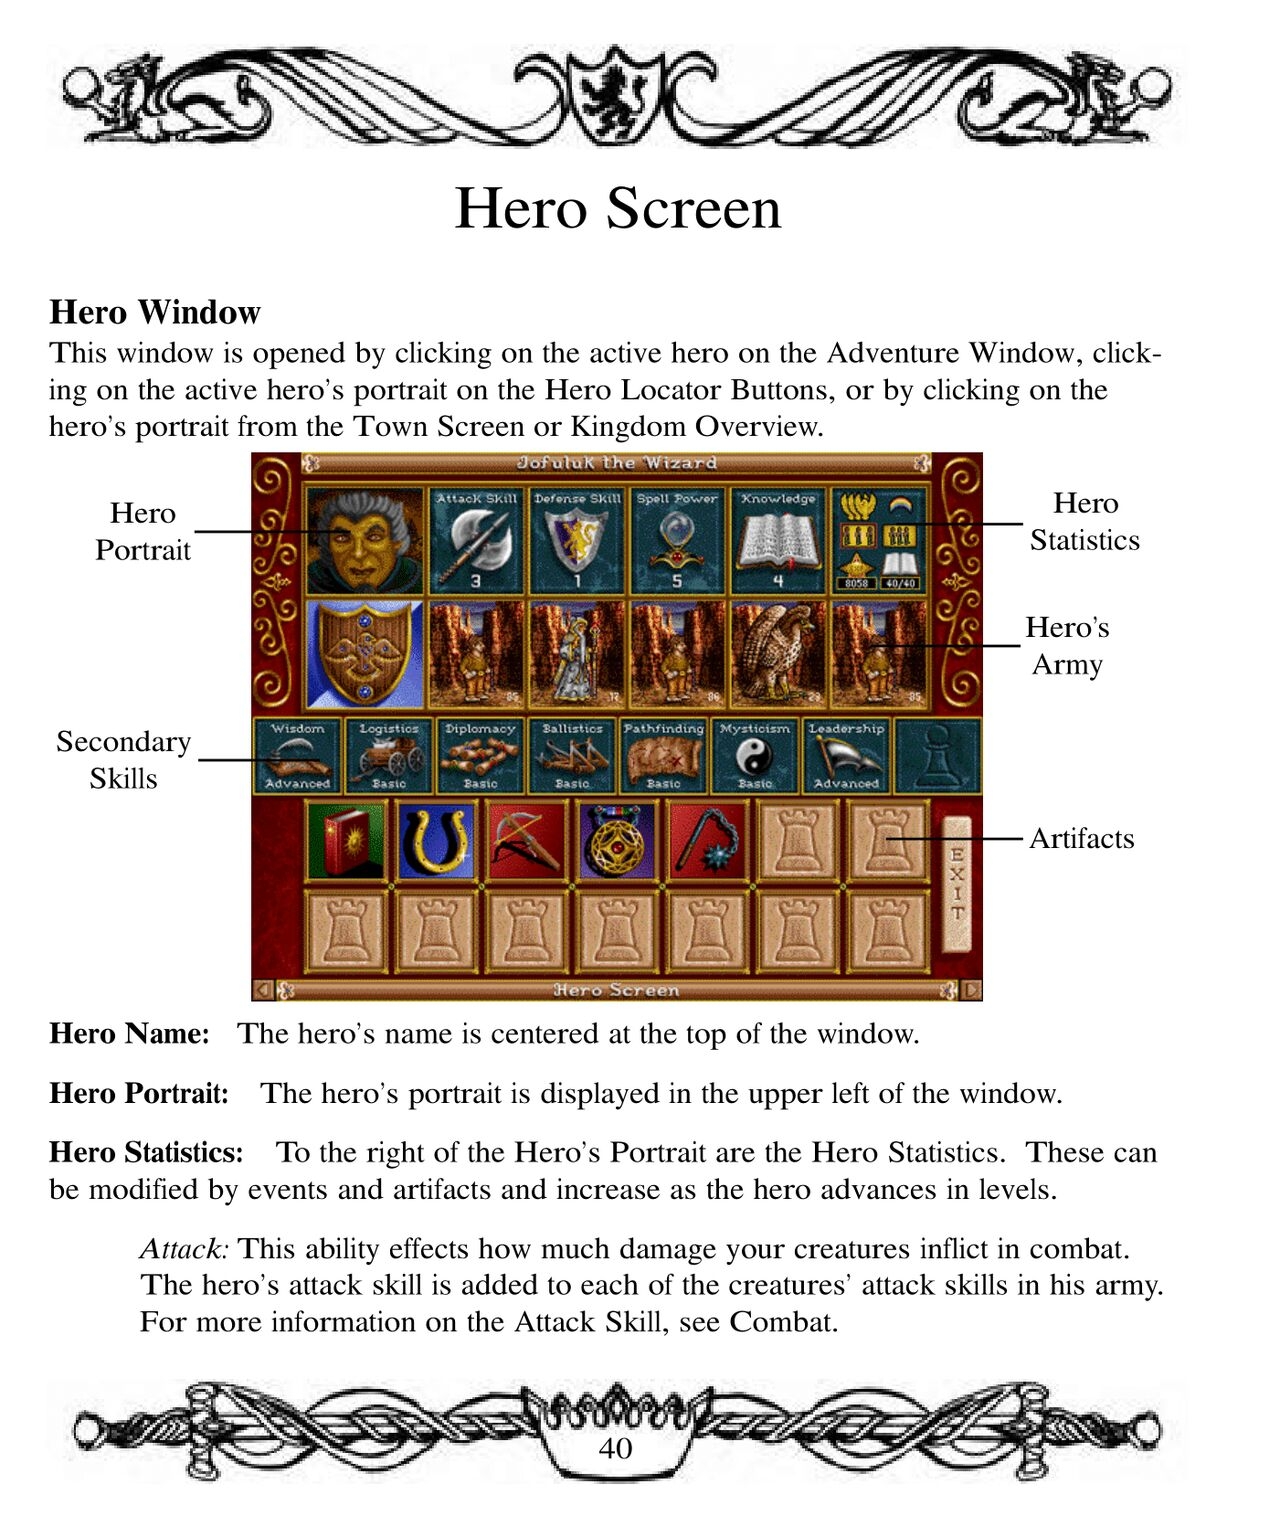 Heroes of Might and Magic II: Gold - game manual 40